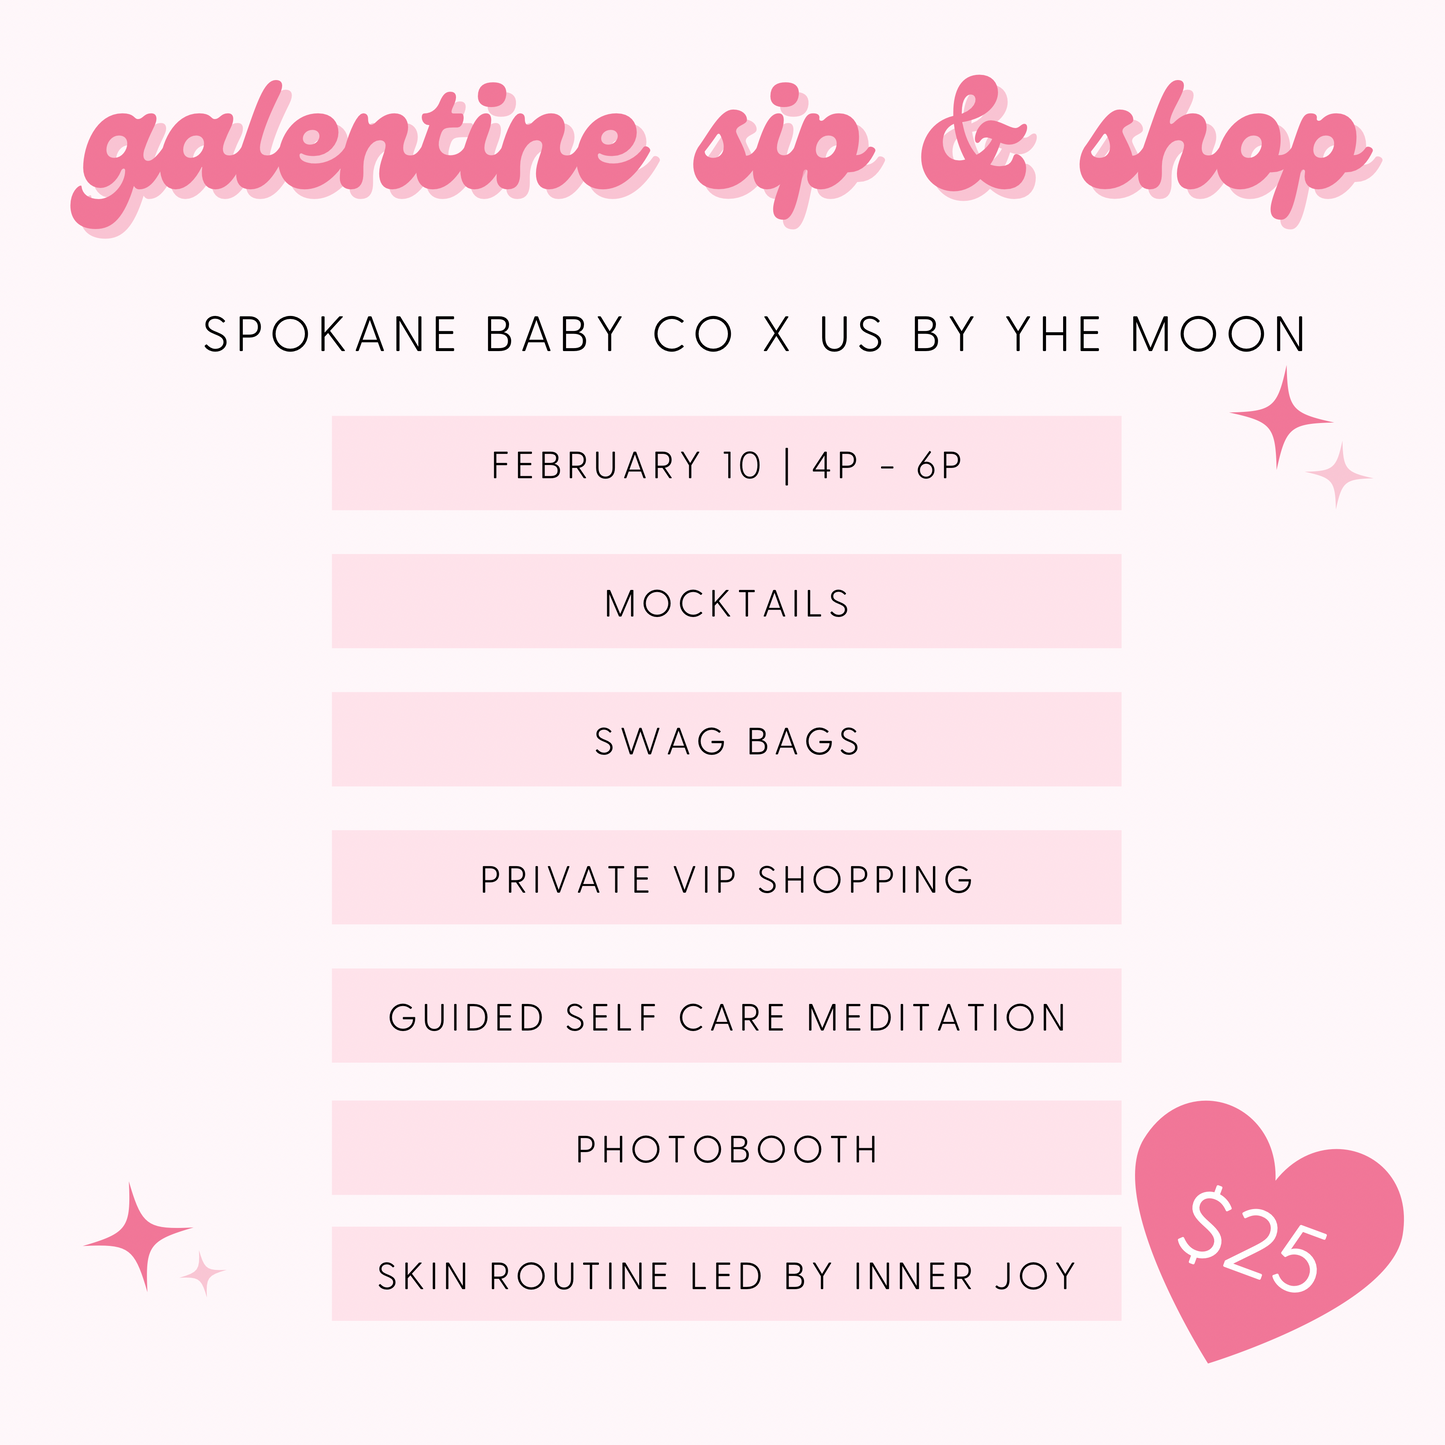 Spokane Baby Co x Us By The Moon | Galentine Event